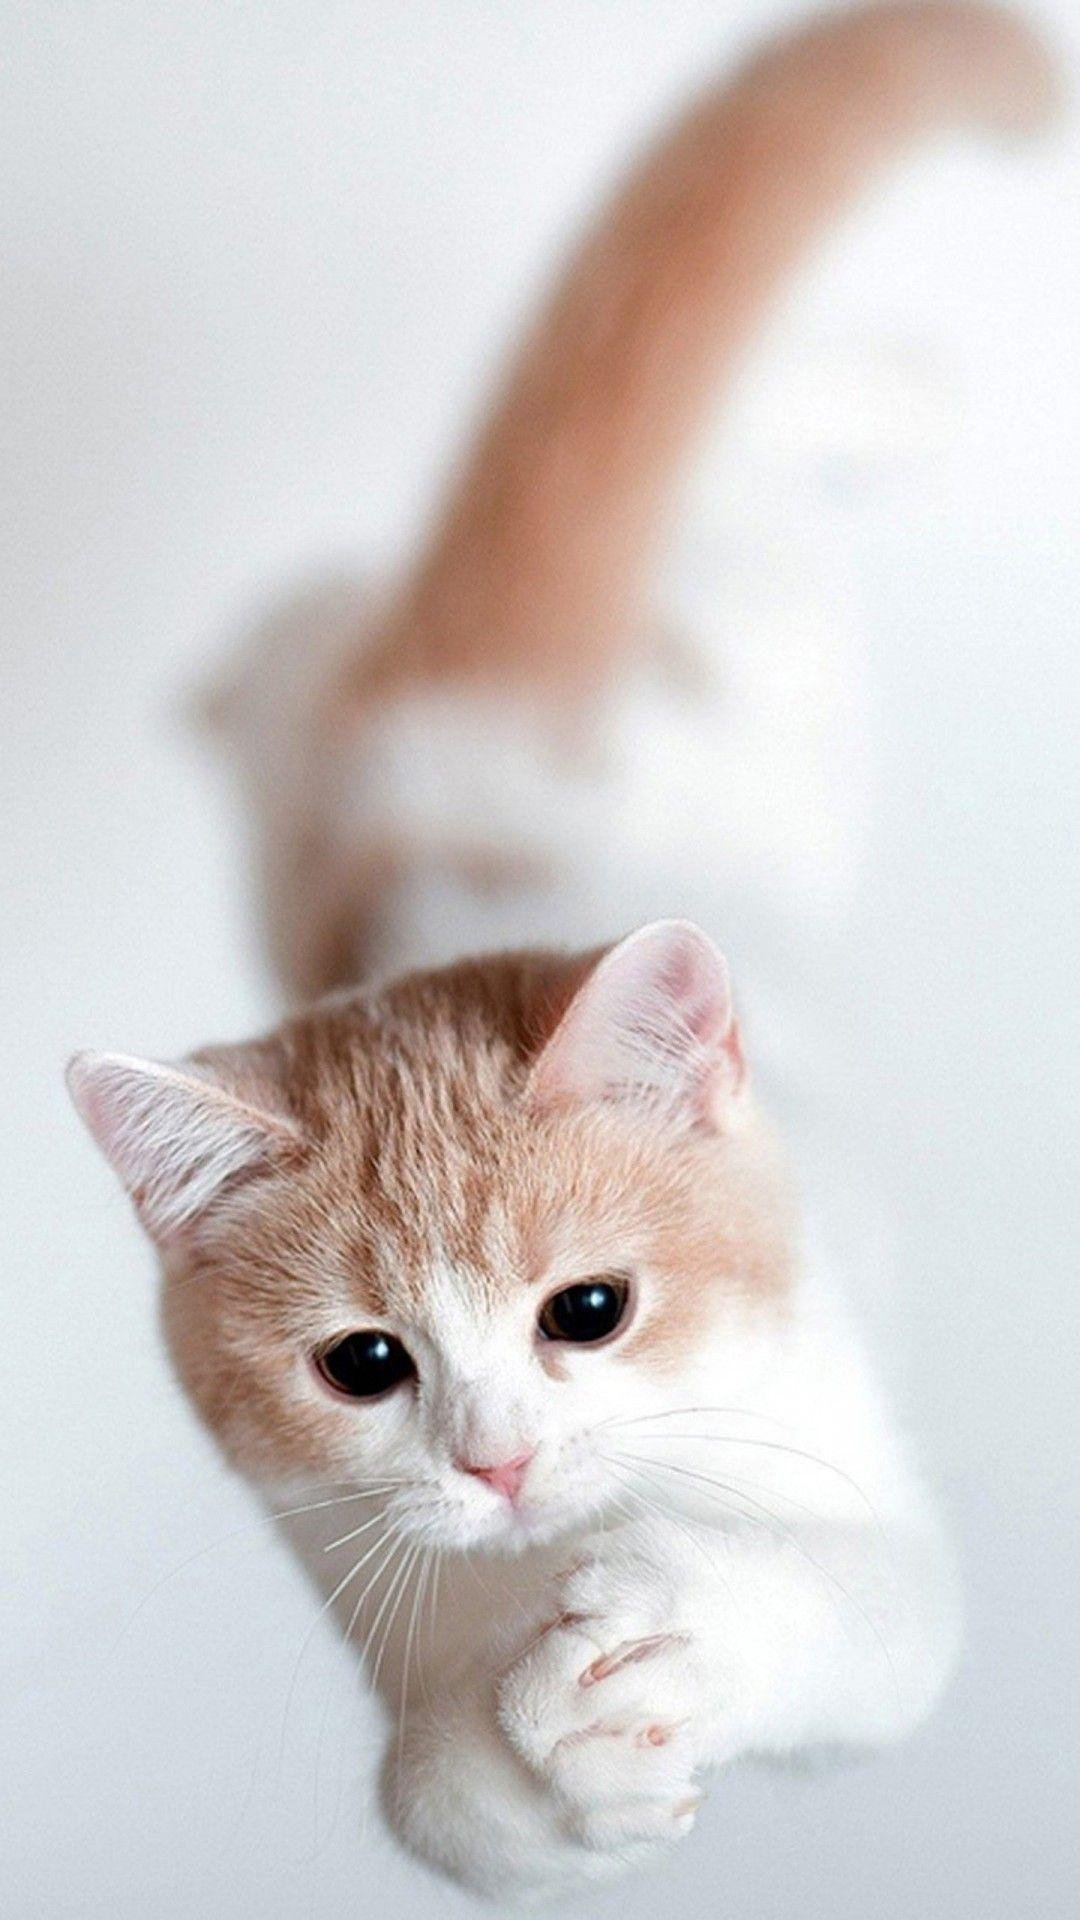 hd wallpapers of cute cats